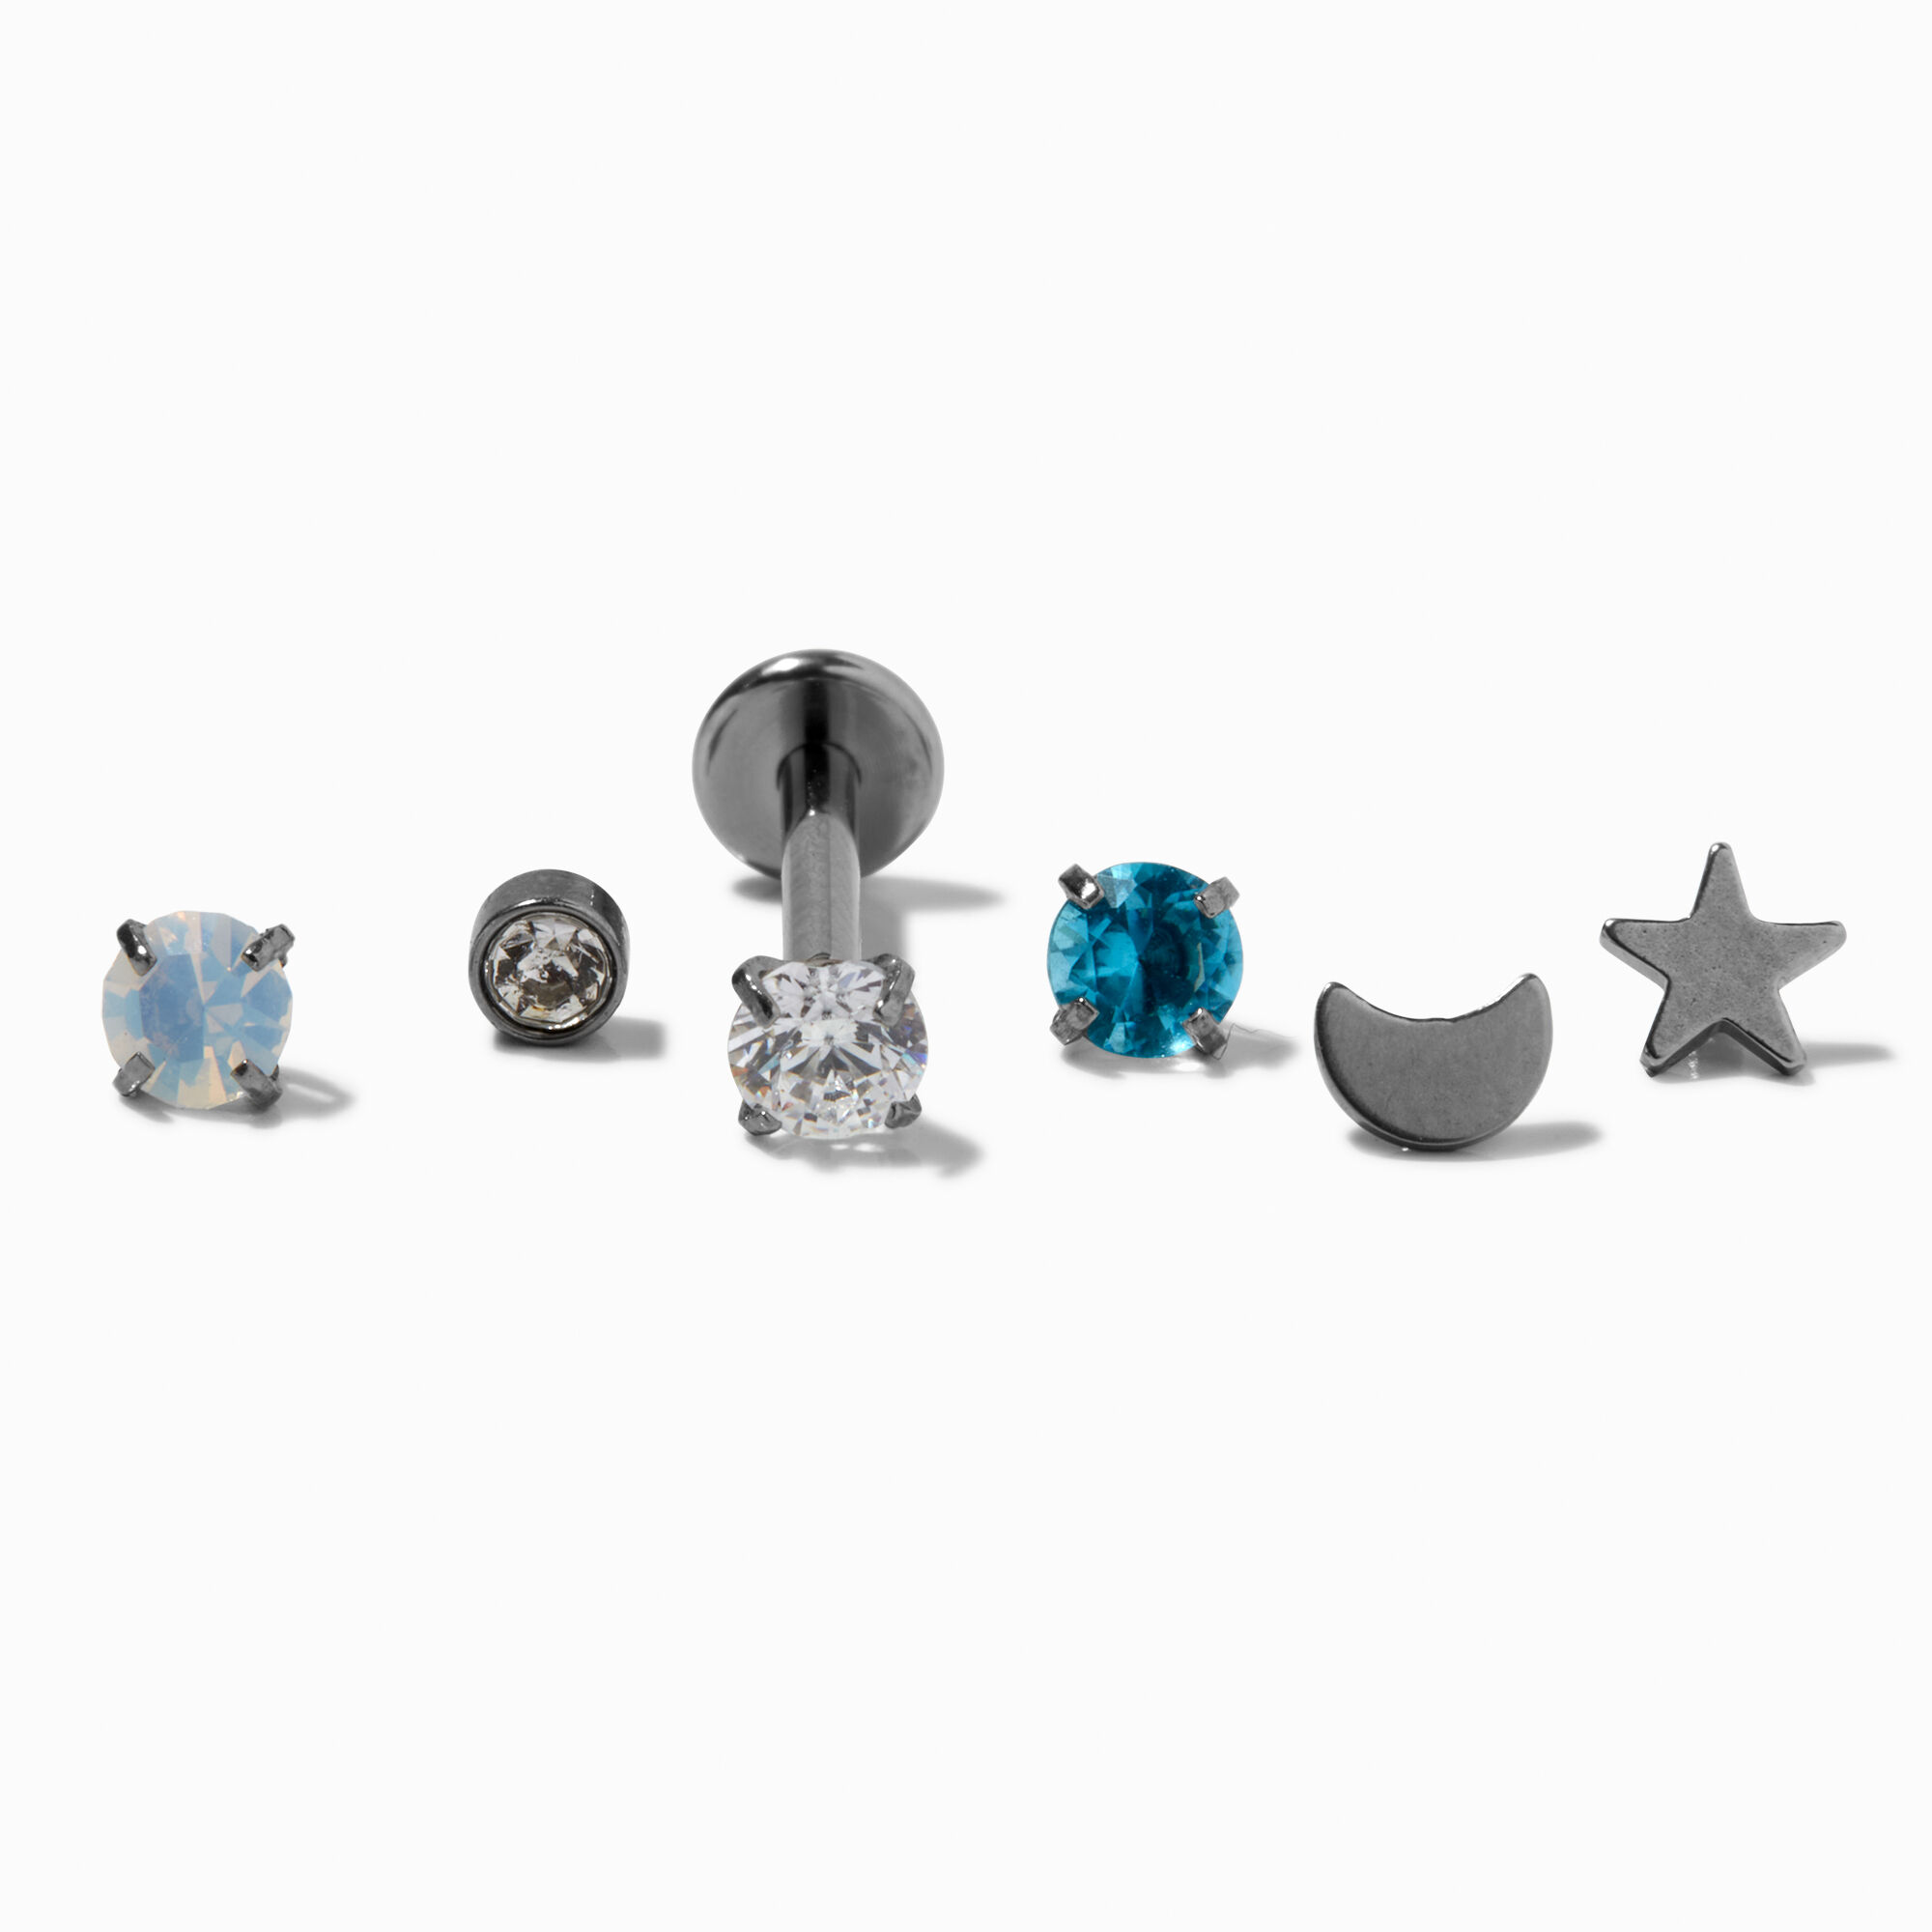 View Claires Titanium 16G Celestial Changeable Flat Back Tragus Earrings 6 Pack Silver information